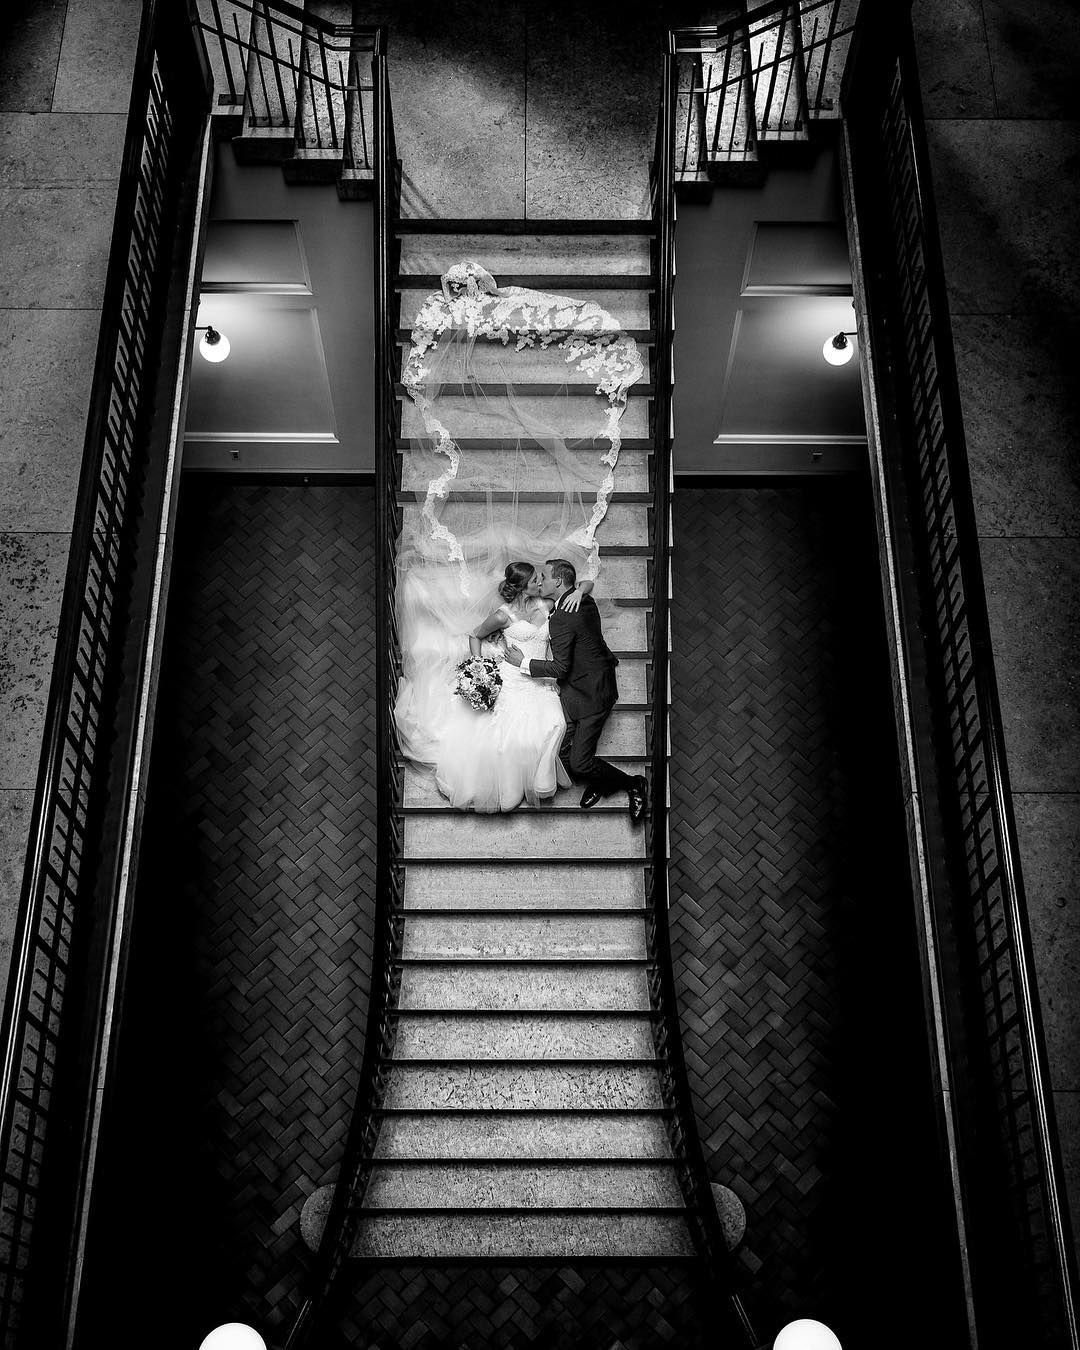 Bird’s-eye view of a bride and groom kissing and lying down on a staircase with the bridal veil spread out